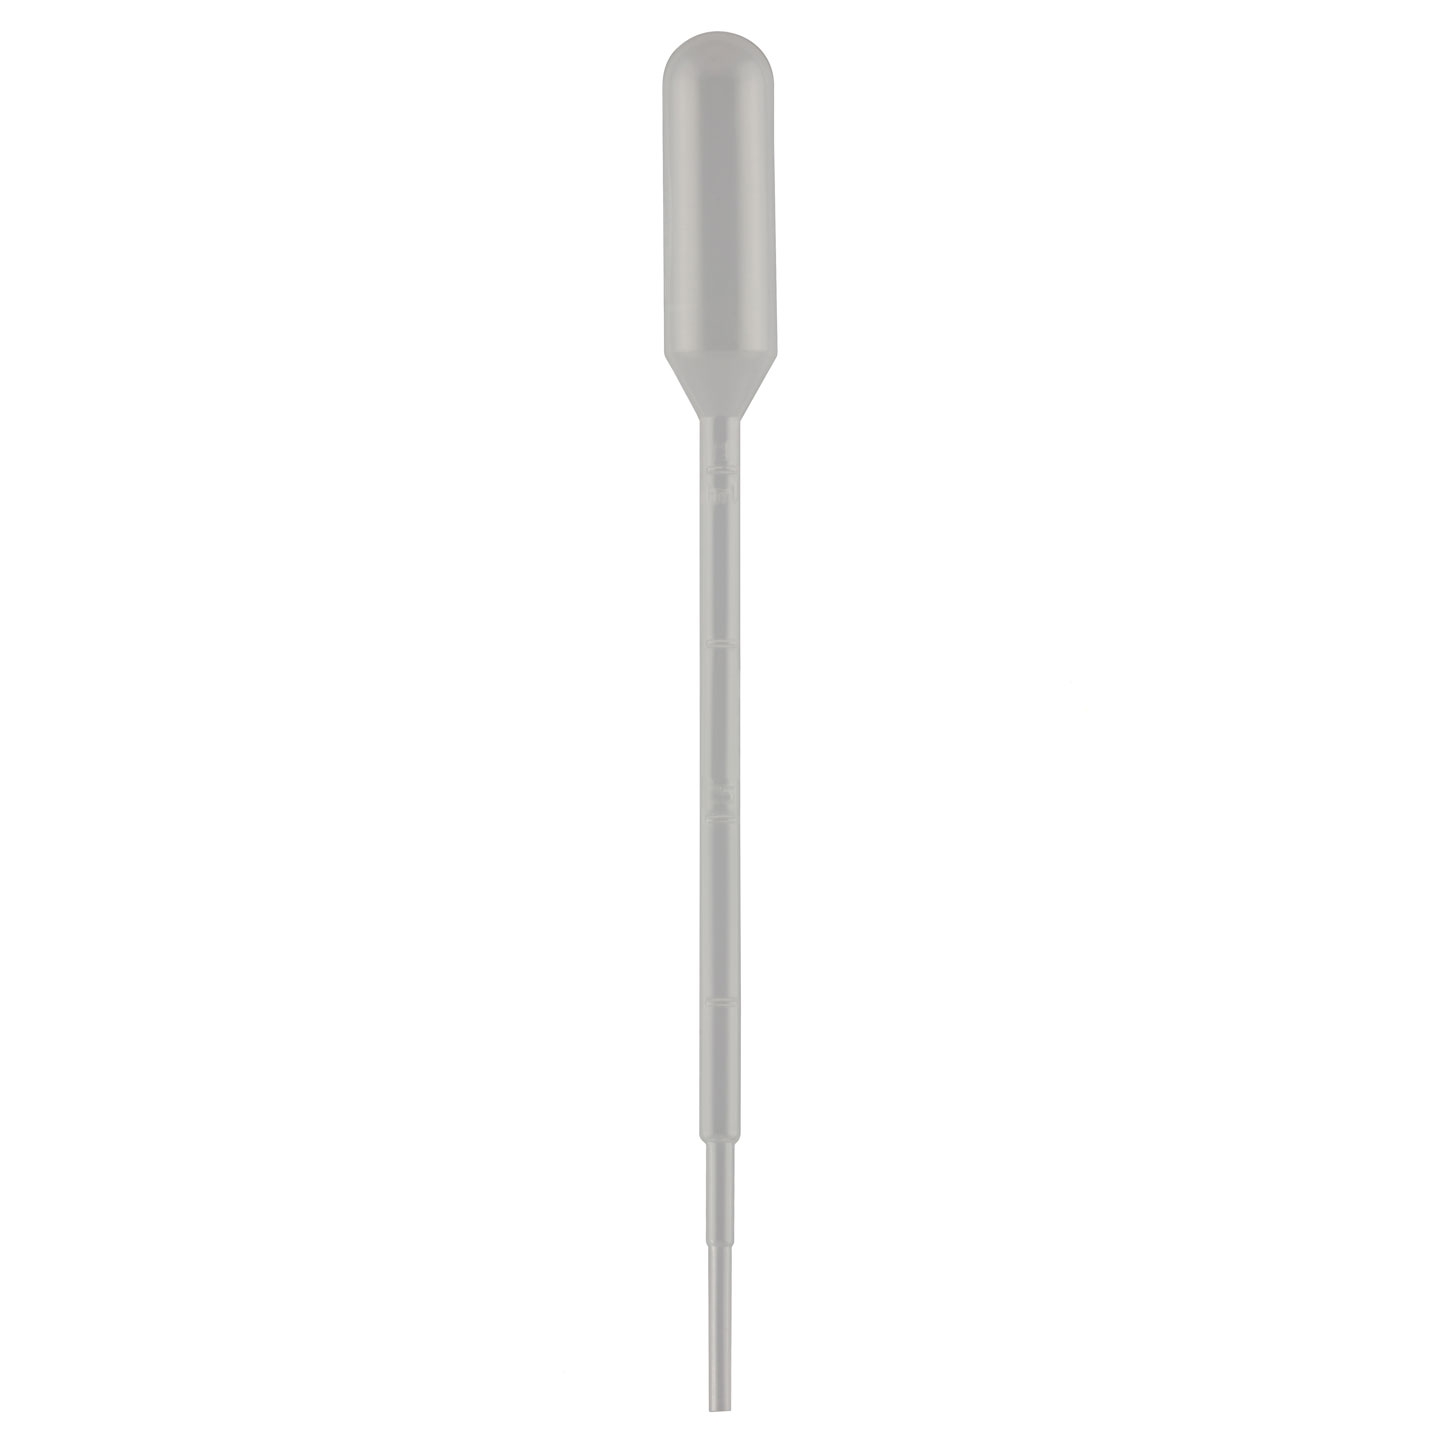 Pasteur Pipette 3ml, 160mm, Sterile, Pack Of 500pipettes In 20s